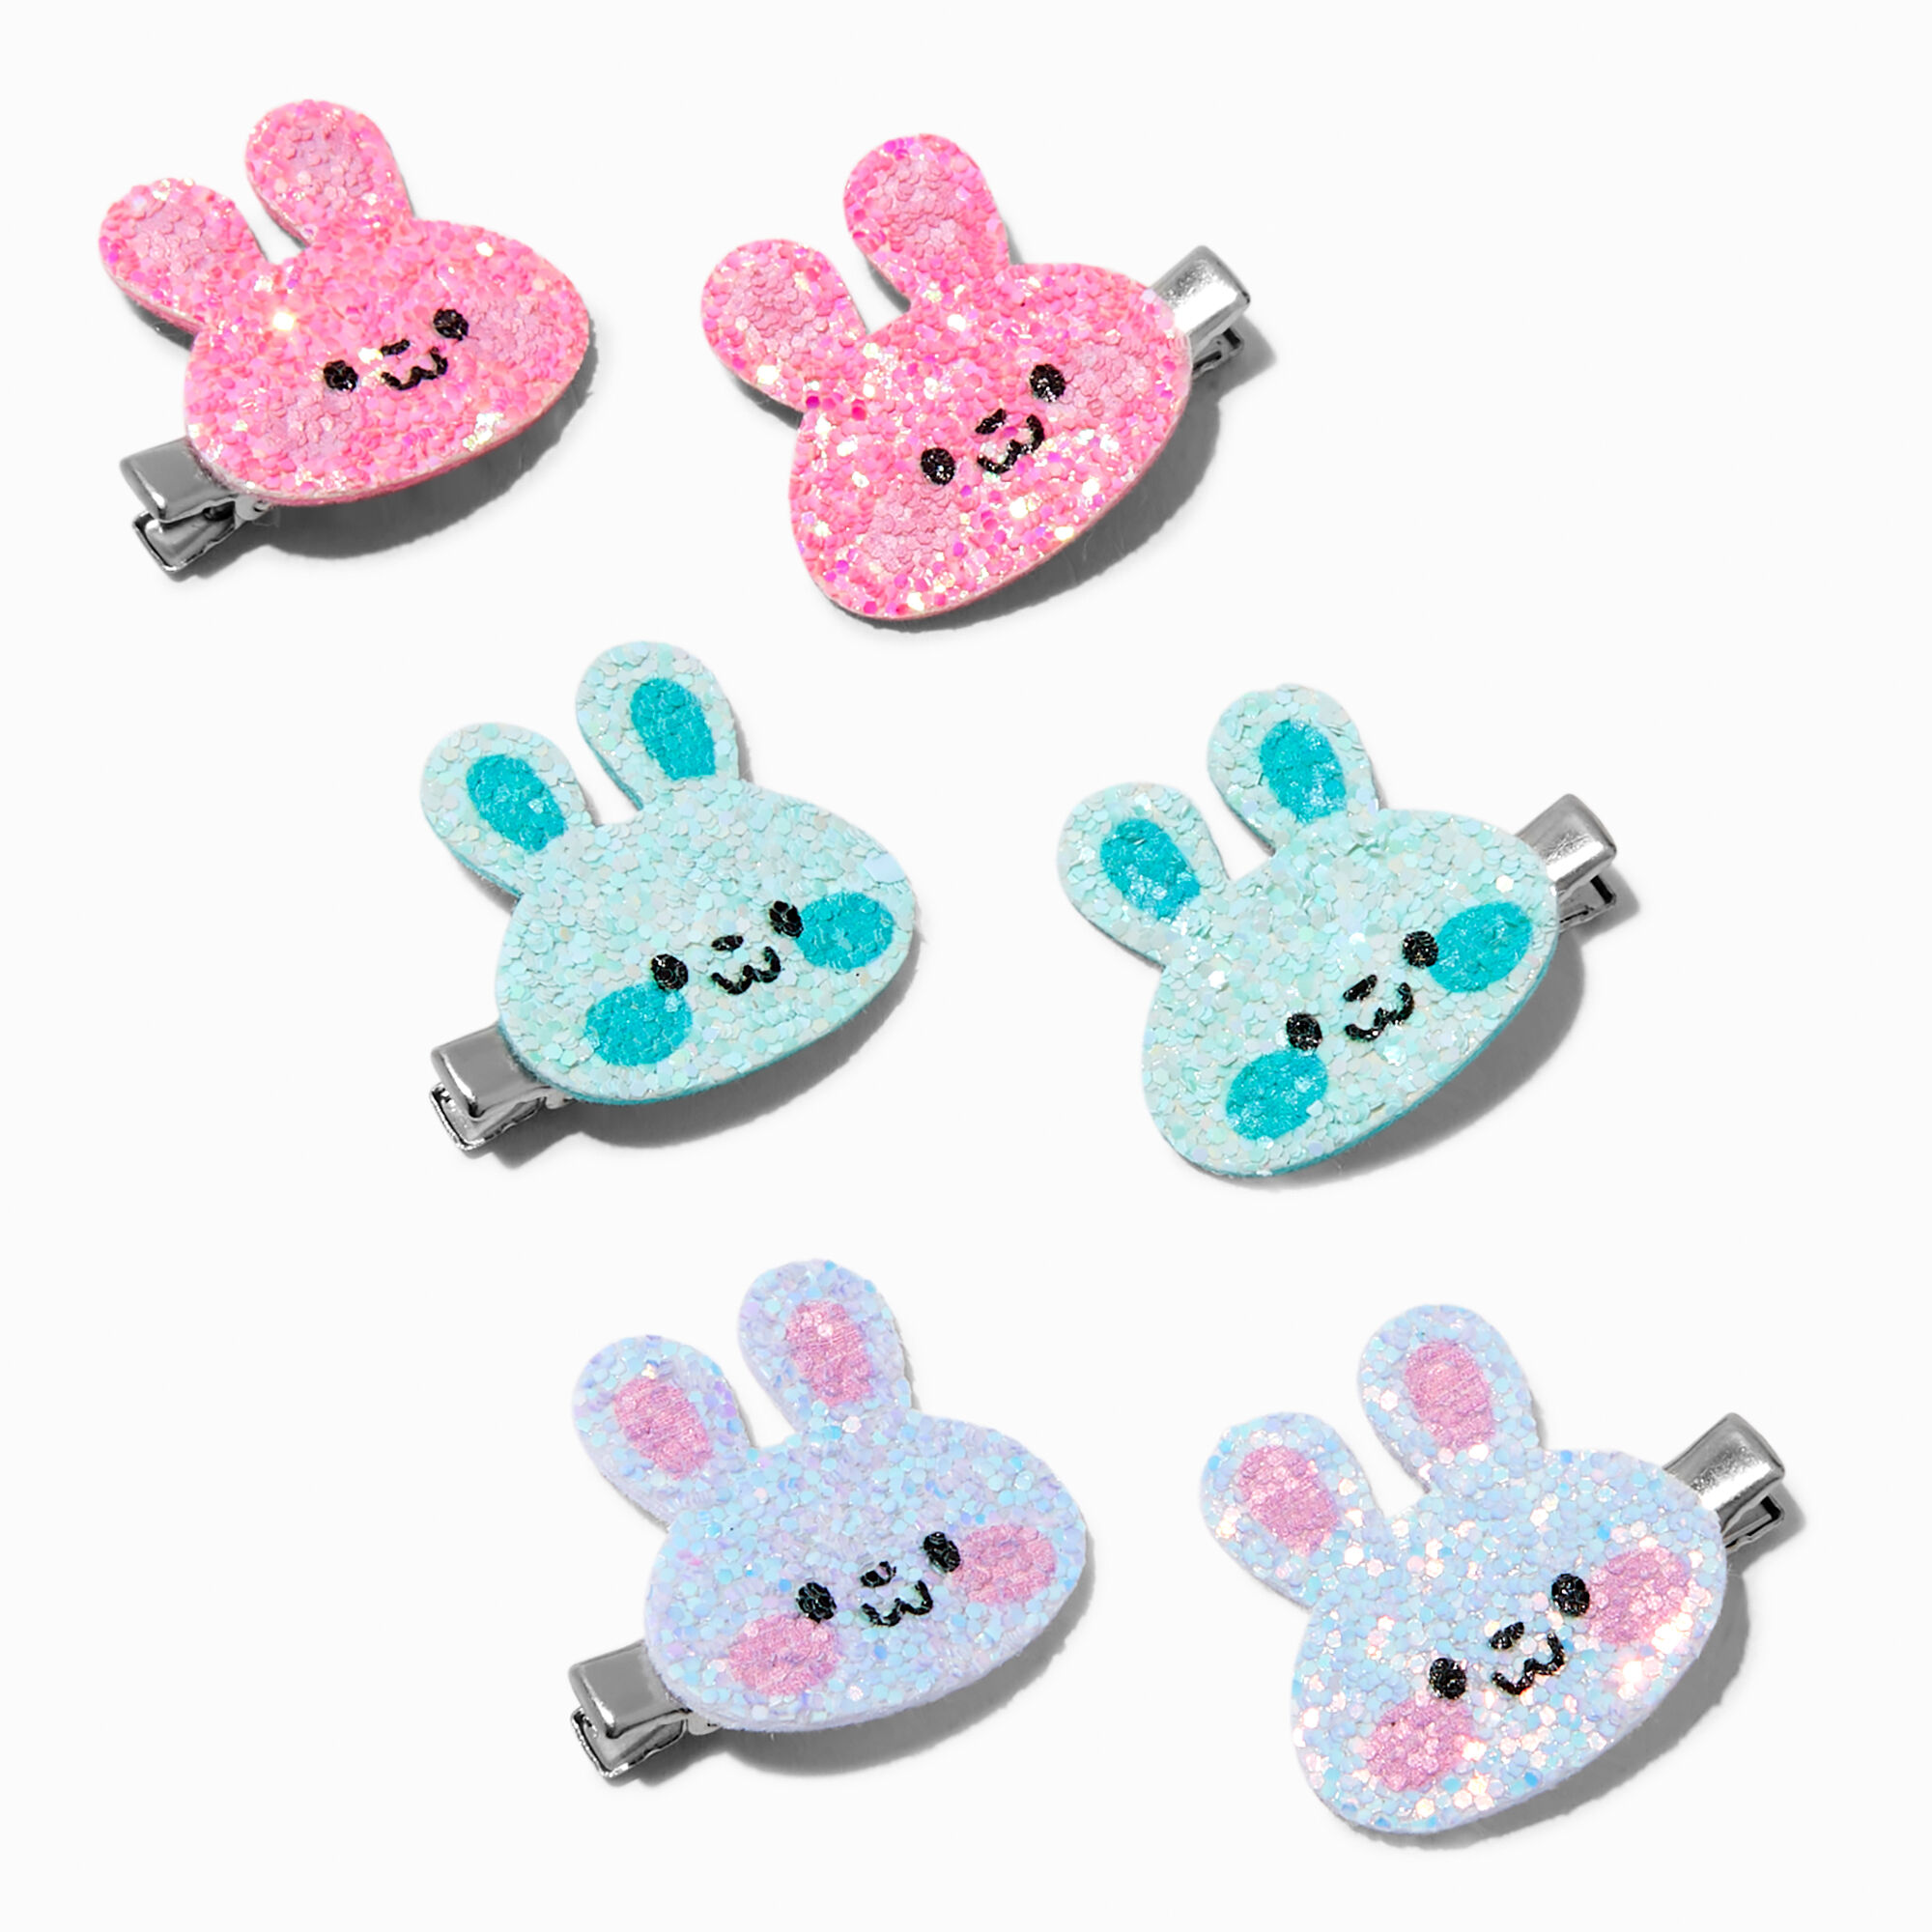 View Claires Club Bunny Head Hair Clips 6 Pack information